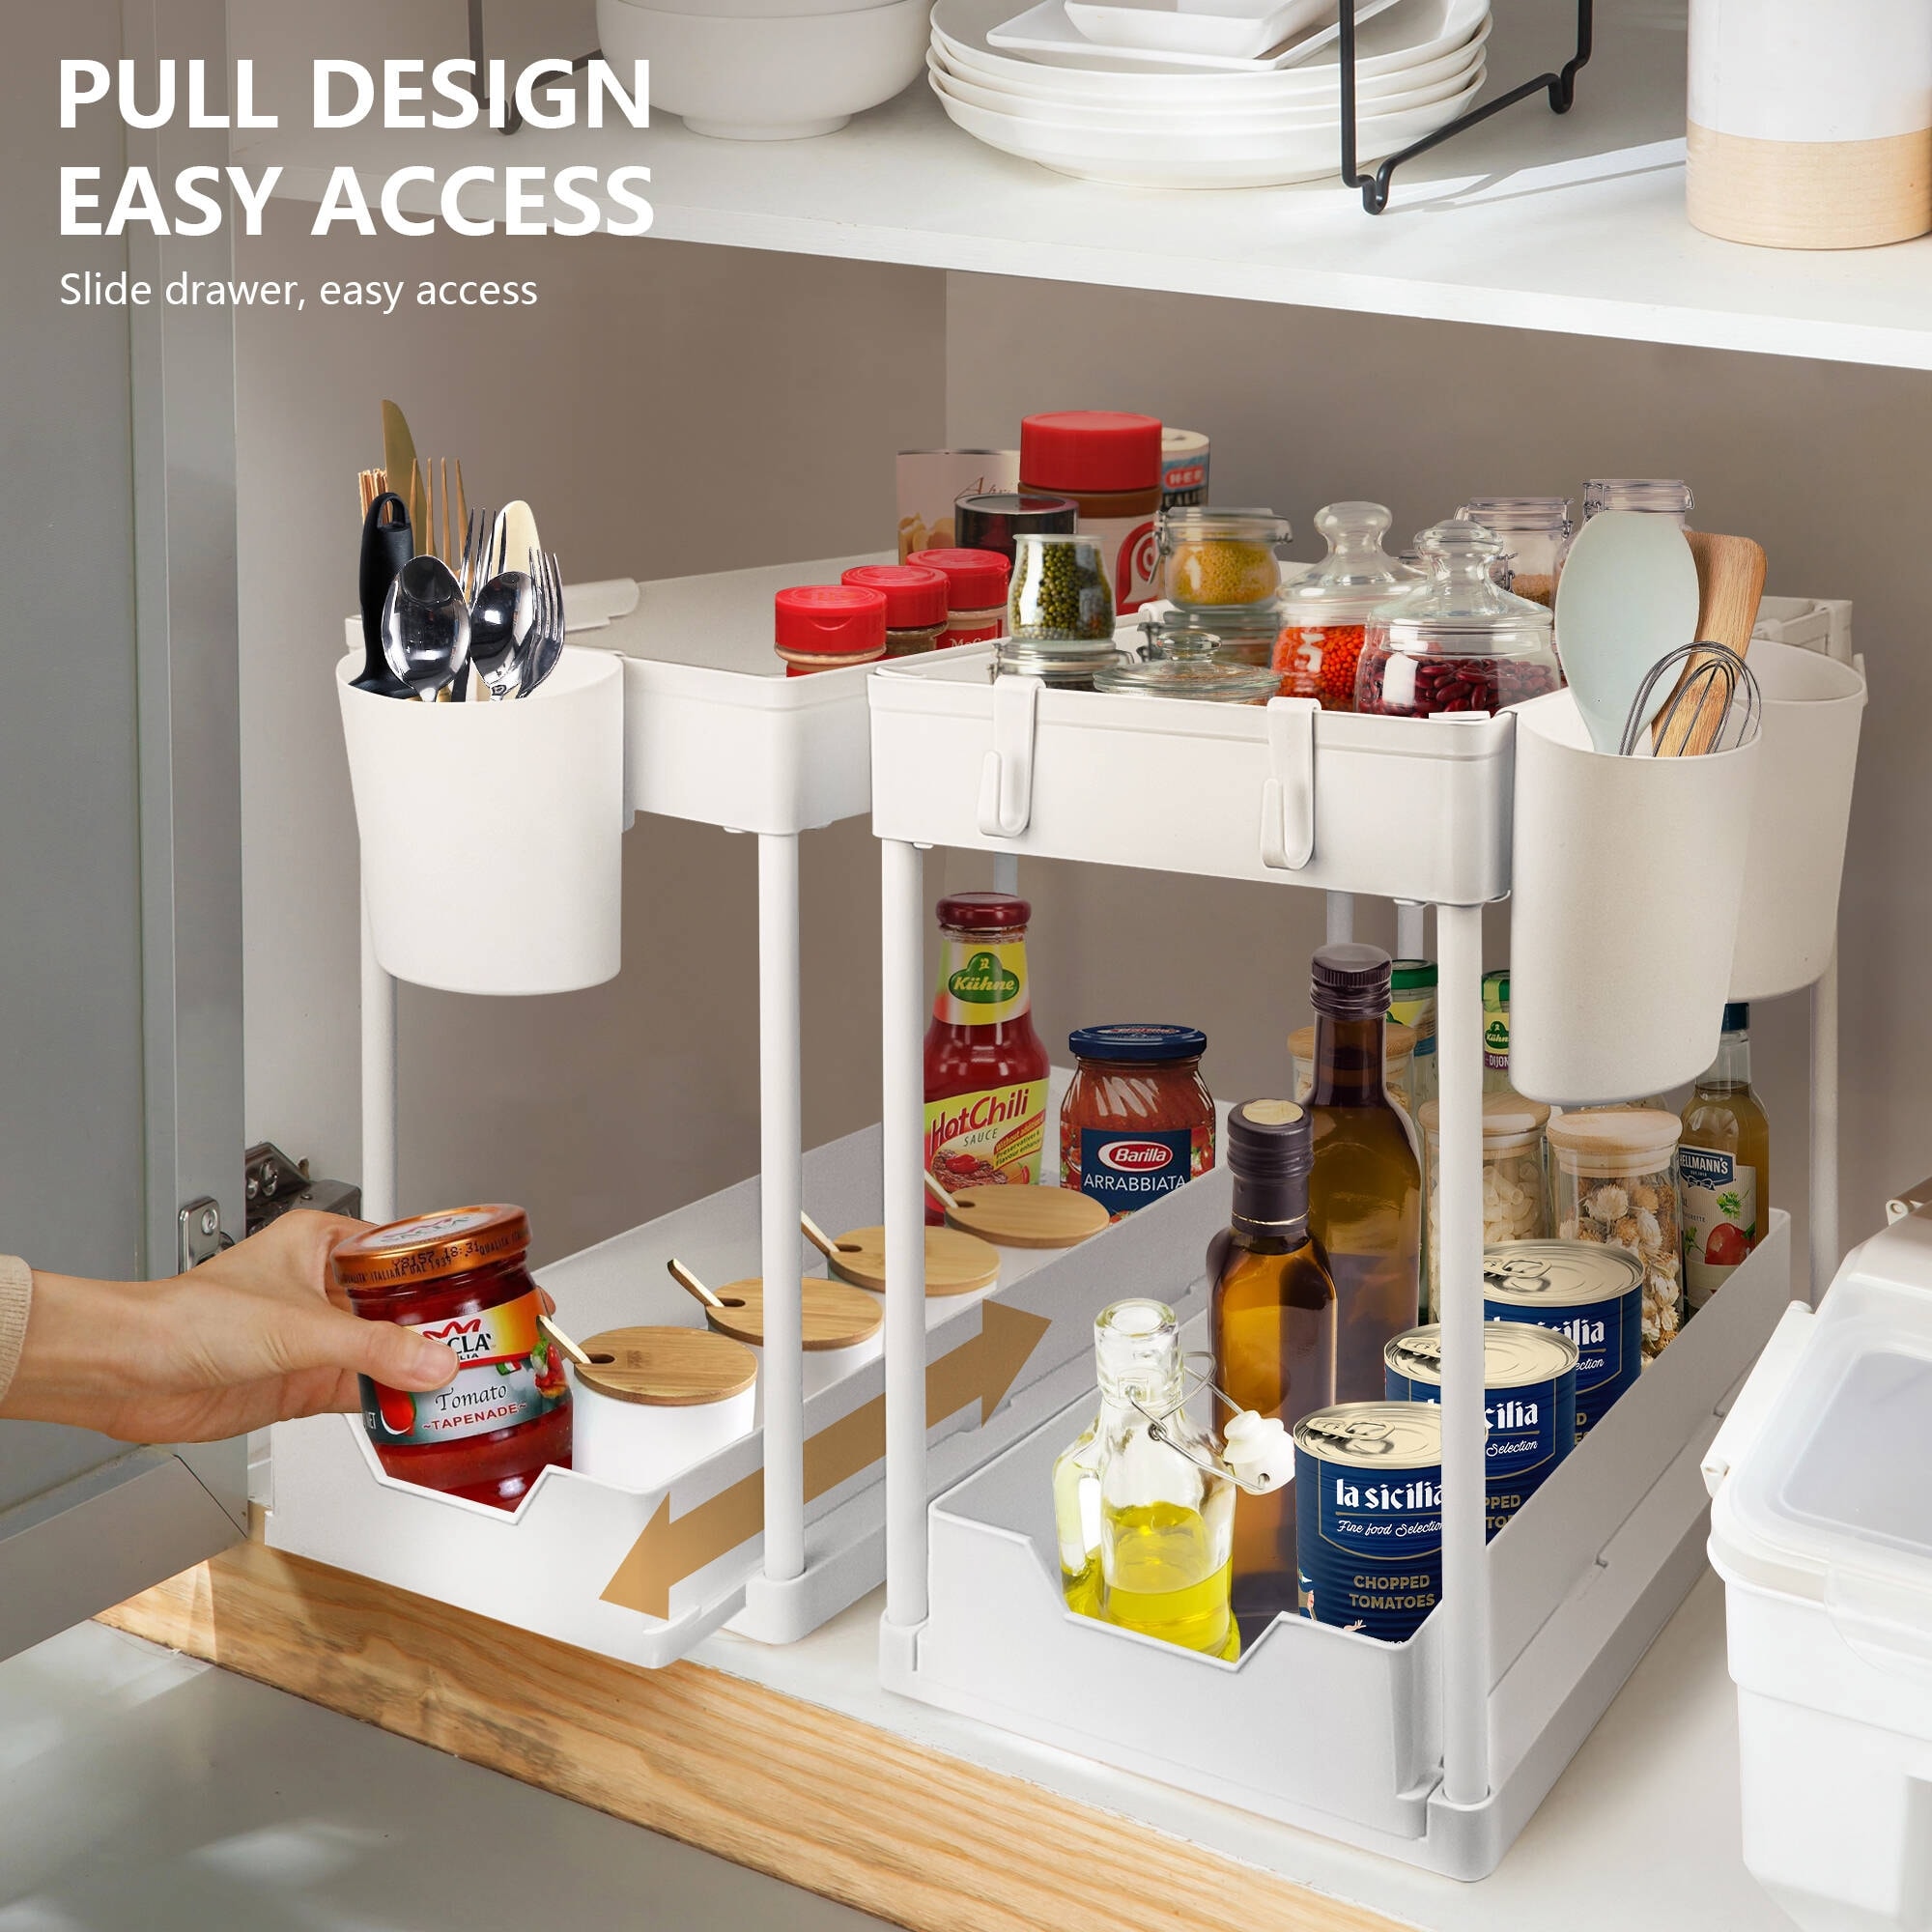 https://ak1.ostkcdn.com/images/products/is/images/direct/0be1cc38efadd6d4ce5659d022b7525f62607aa1/2-Tier-Under-Sink-Organizer-with-Pull-Out-Sliding-Storage-Drawer-%28Set-of-2%29.jpg